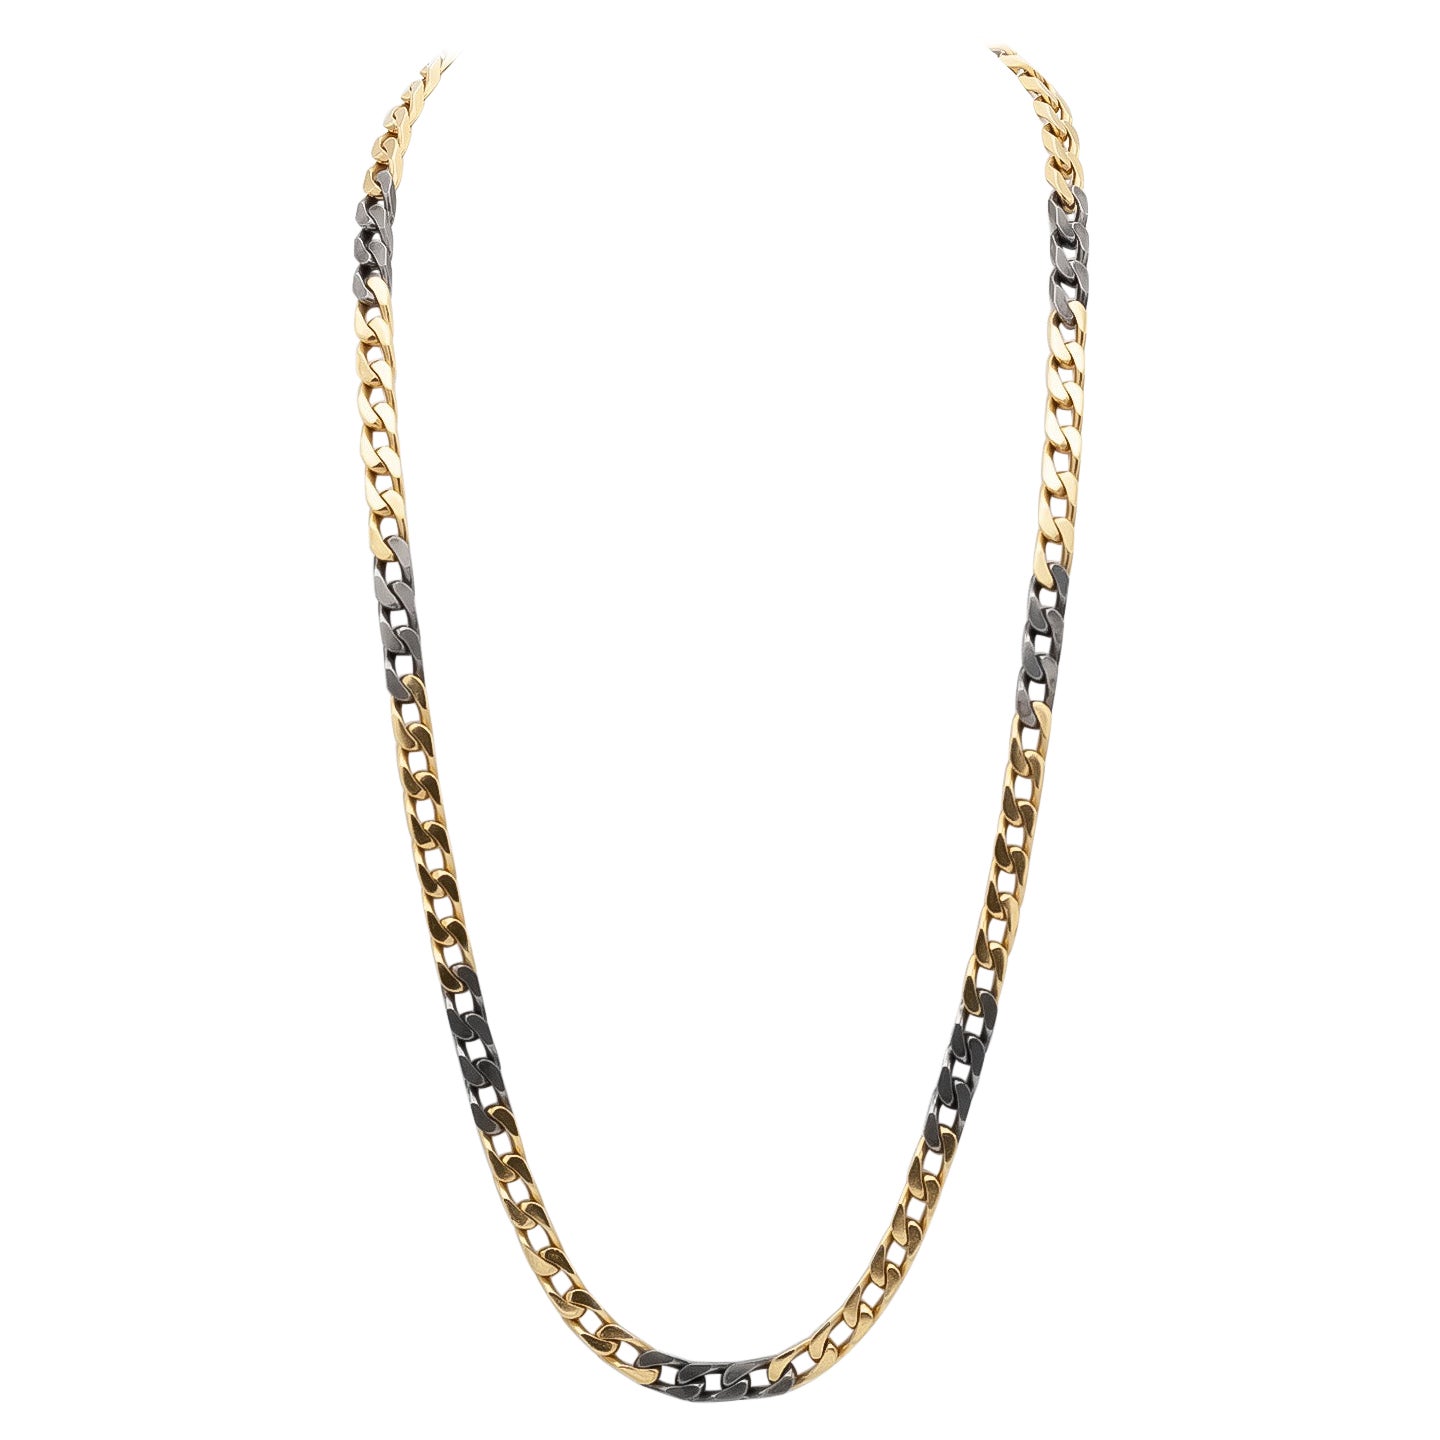 Bvlgari Yellow and Blackened Gold Cuban Links Chain Necklace